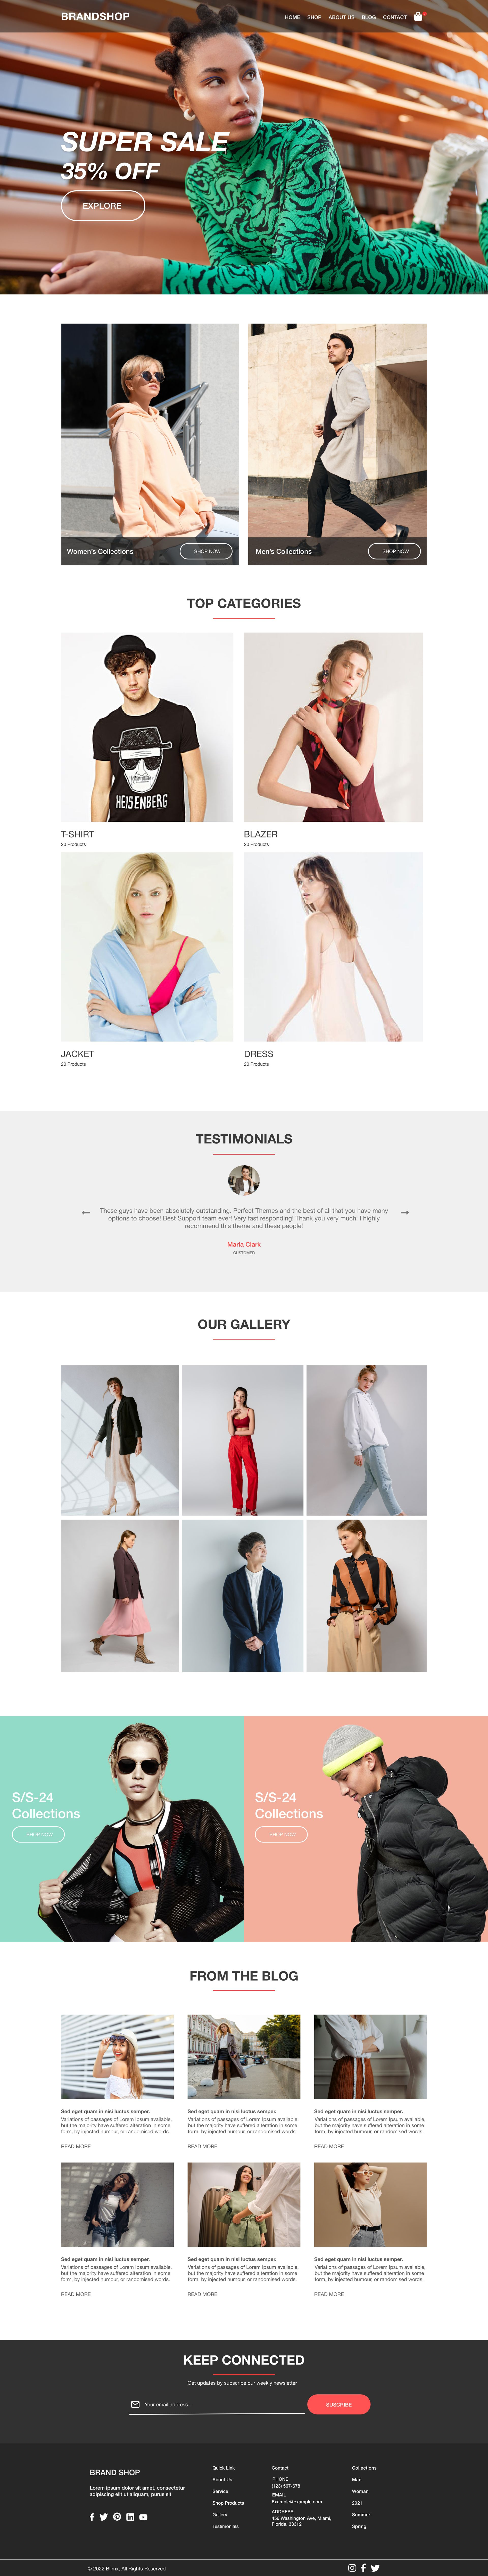 Clothes and Fashion Website Design